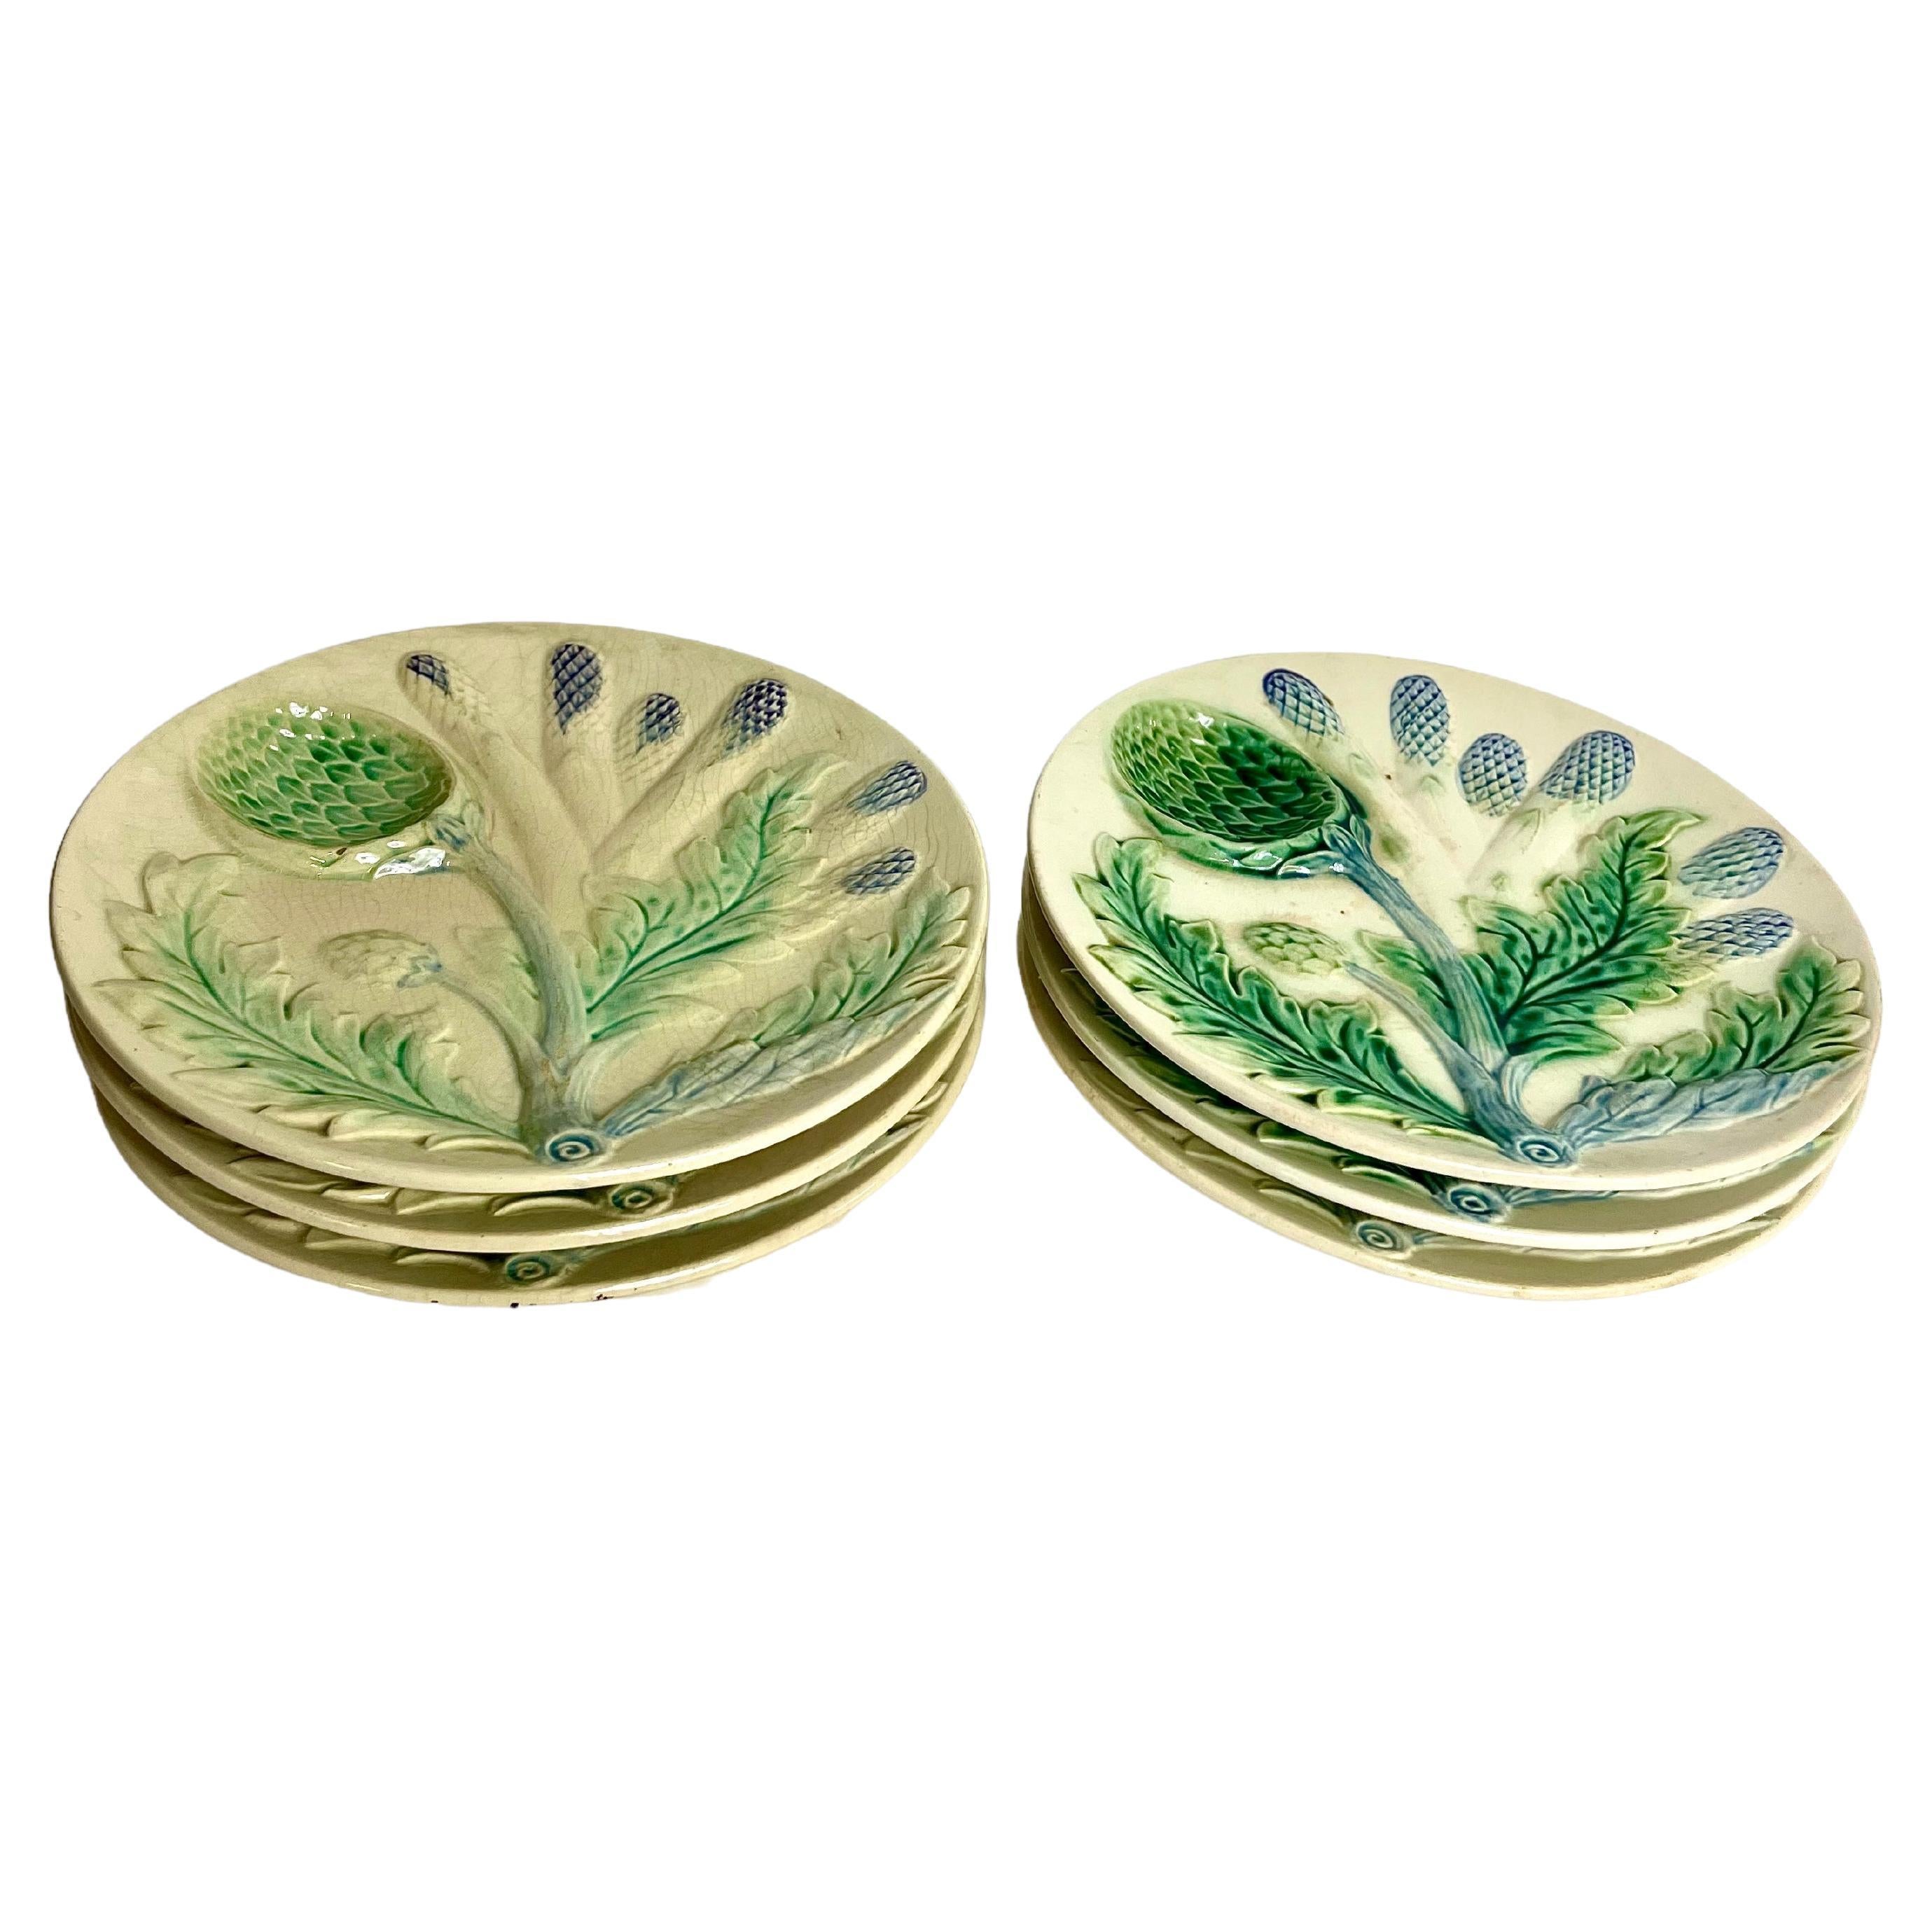 A set of six eye-catching Majolica porcelain asparagus or artichoke serving plates, featuring a beautifully detailed design of asparagus and artichokes in relief, with subtle colour gradation in tones of green and blue. Thought to be originate from